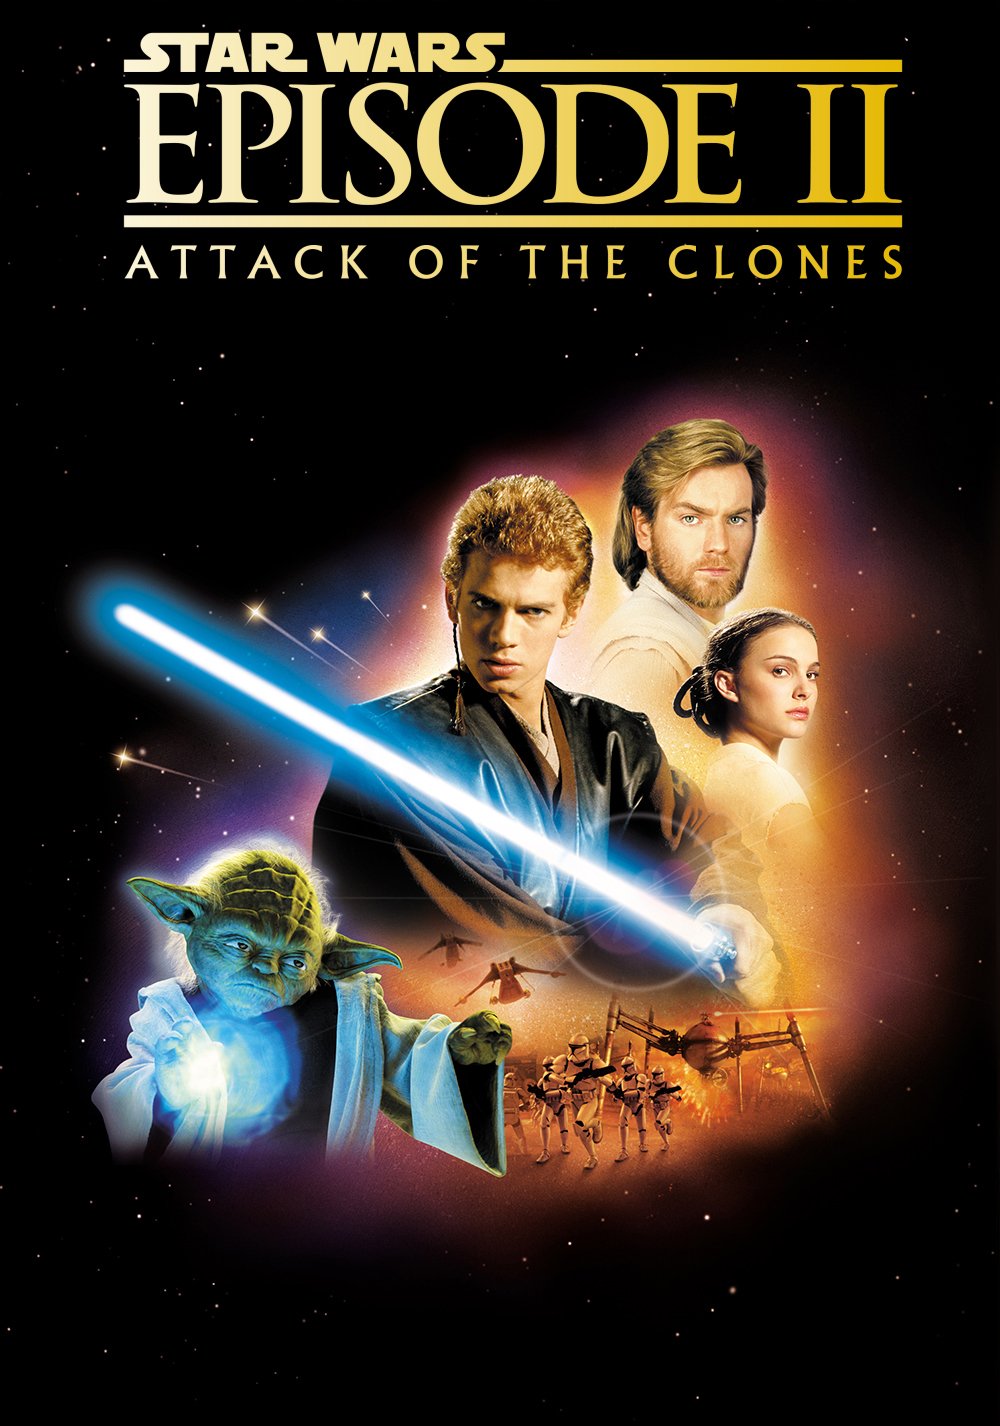 Star Wars Episode II: Attack Of The Clones Movie Poster - ID: 124911 - Image Abyss